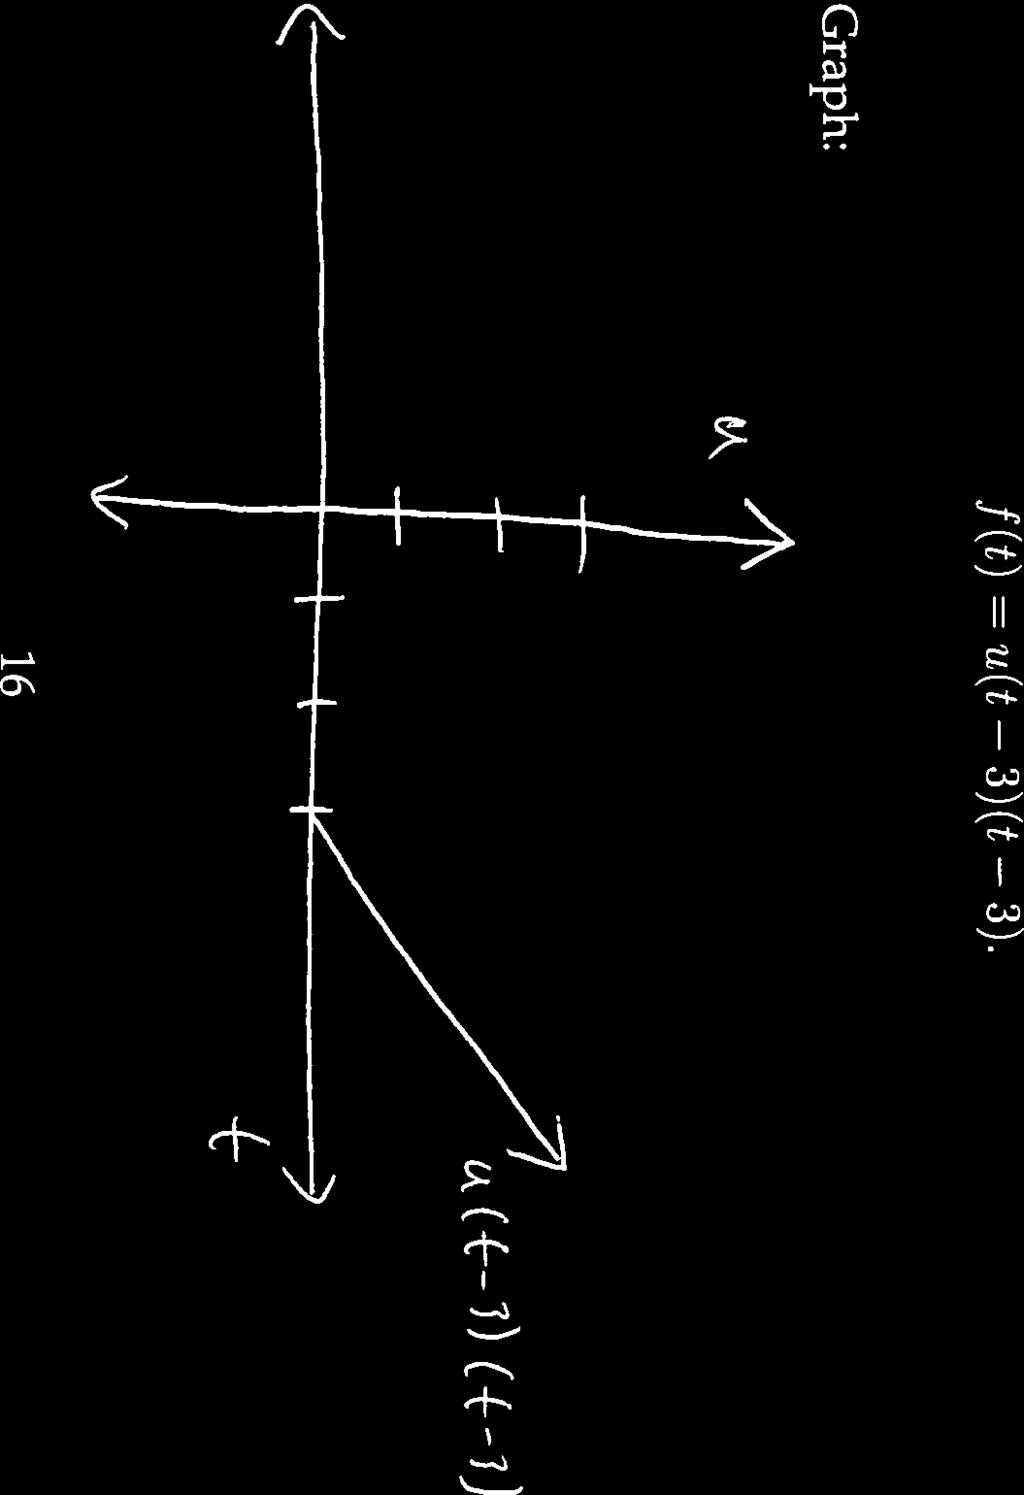 Piecewise Continuous